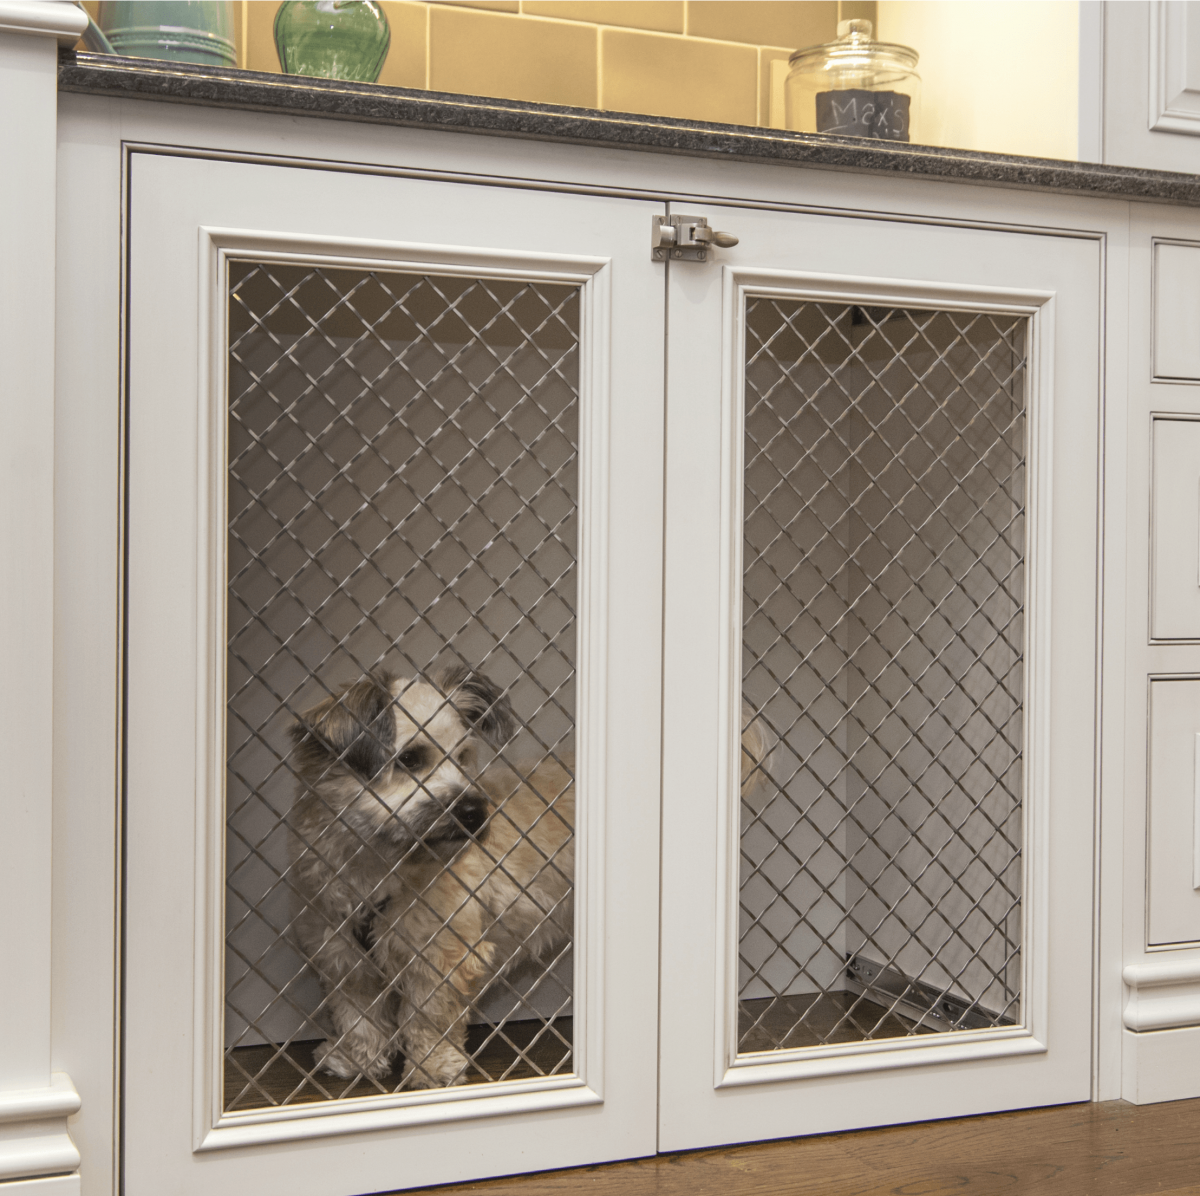 Custom dog crate built into kitchen cabinetry